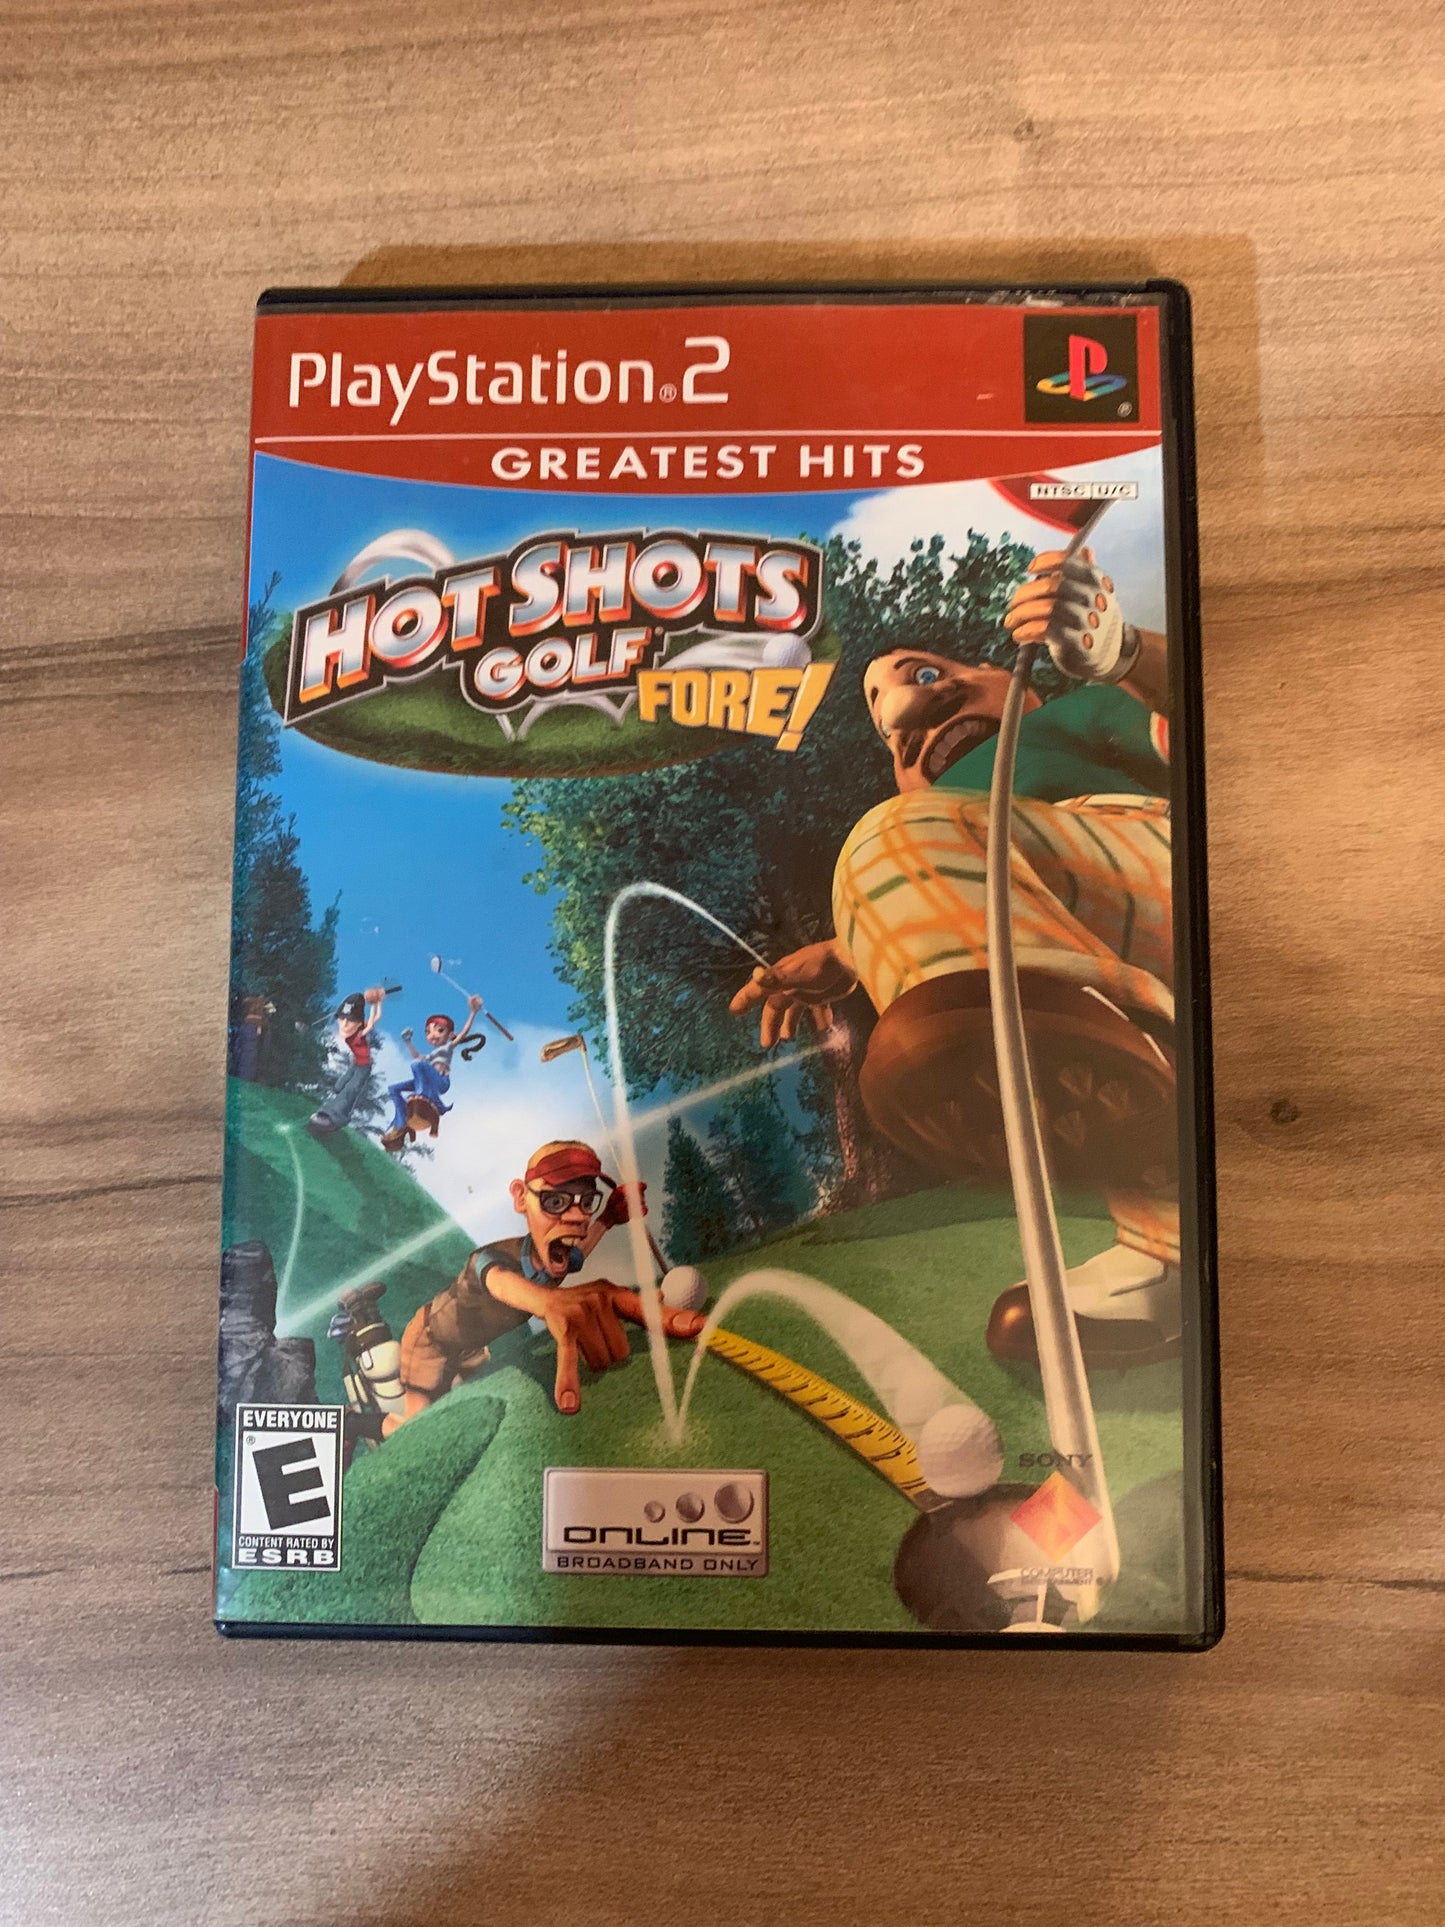 SONY PLAYSTATiON 2 [PS2] | HOT SHOTS GOLF FORE | GREATEST HiTS